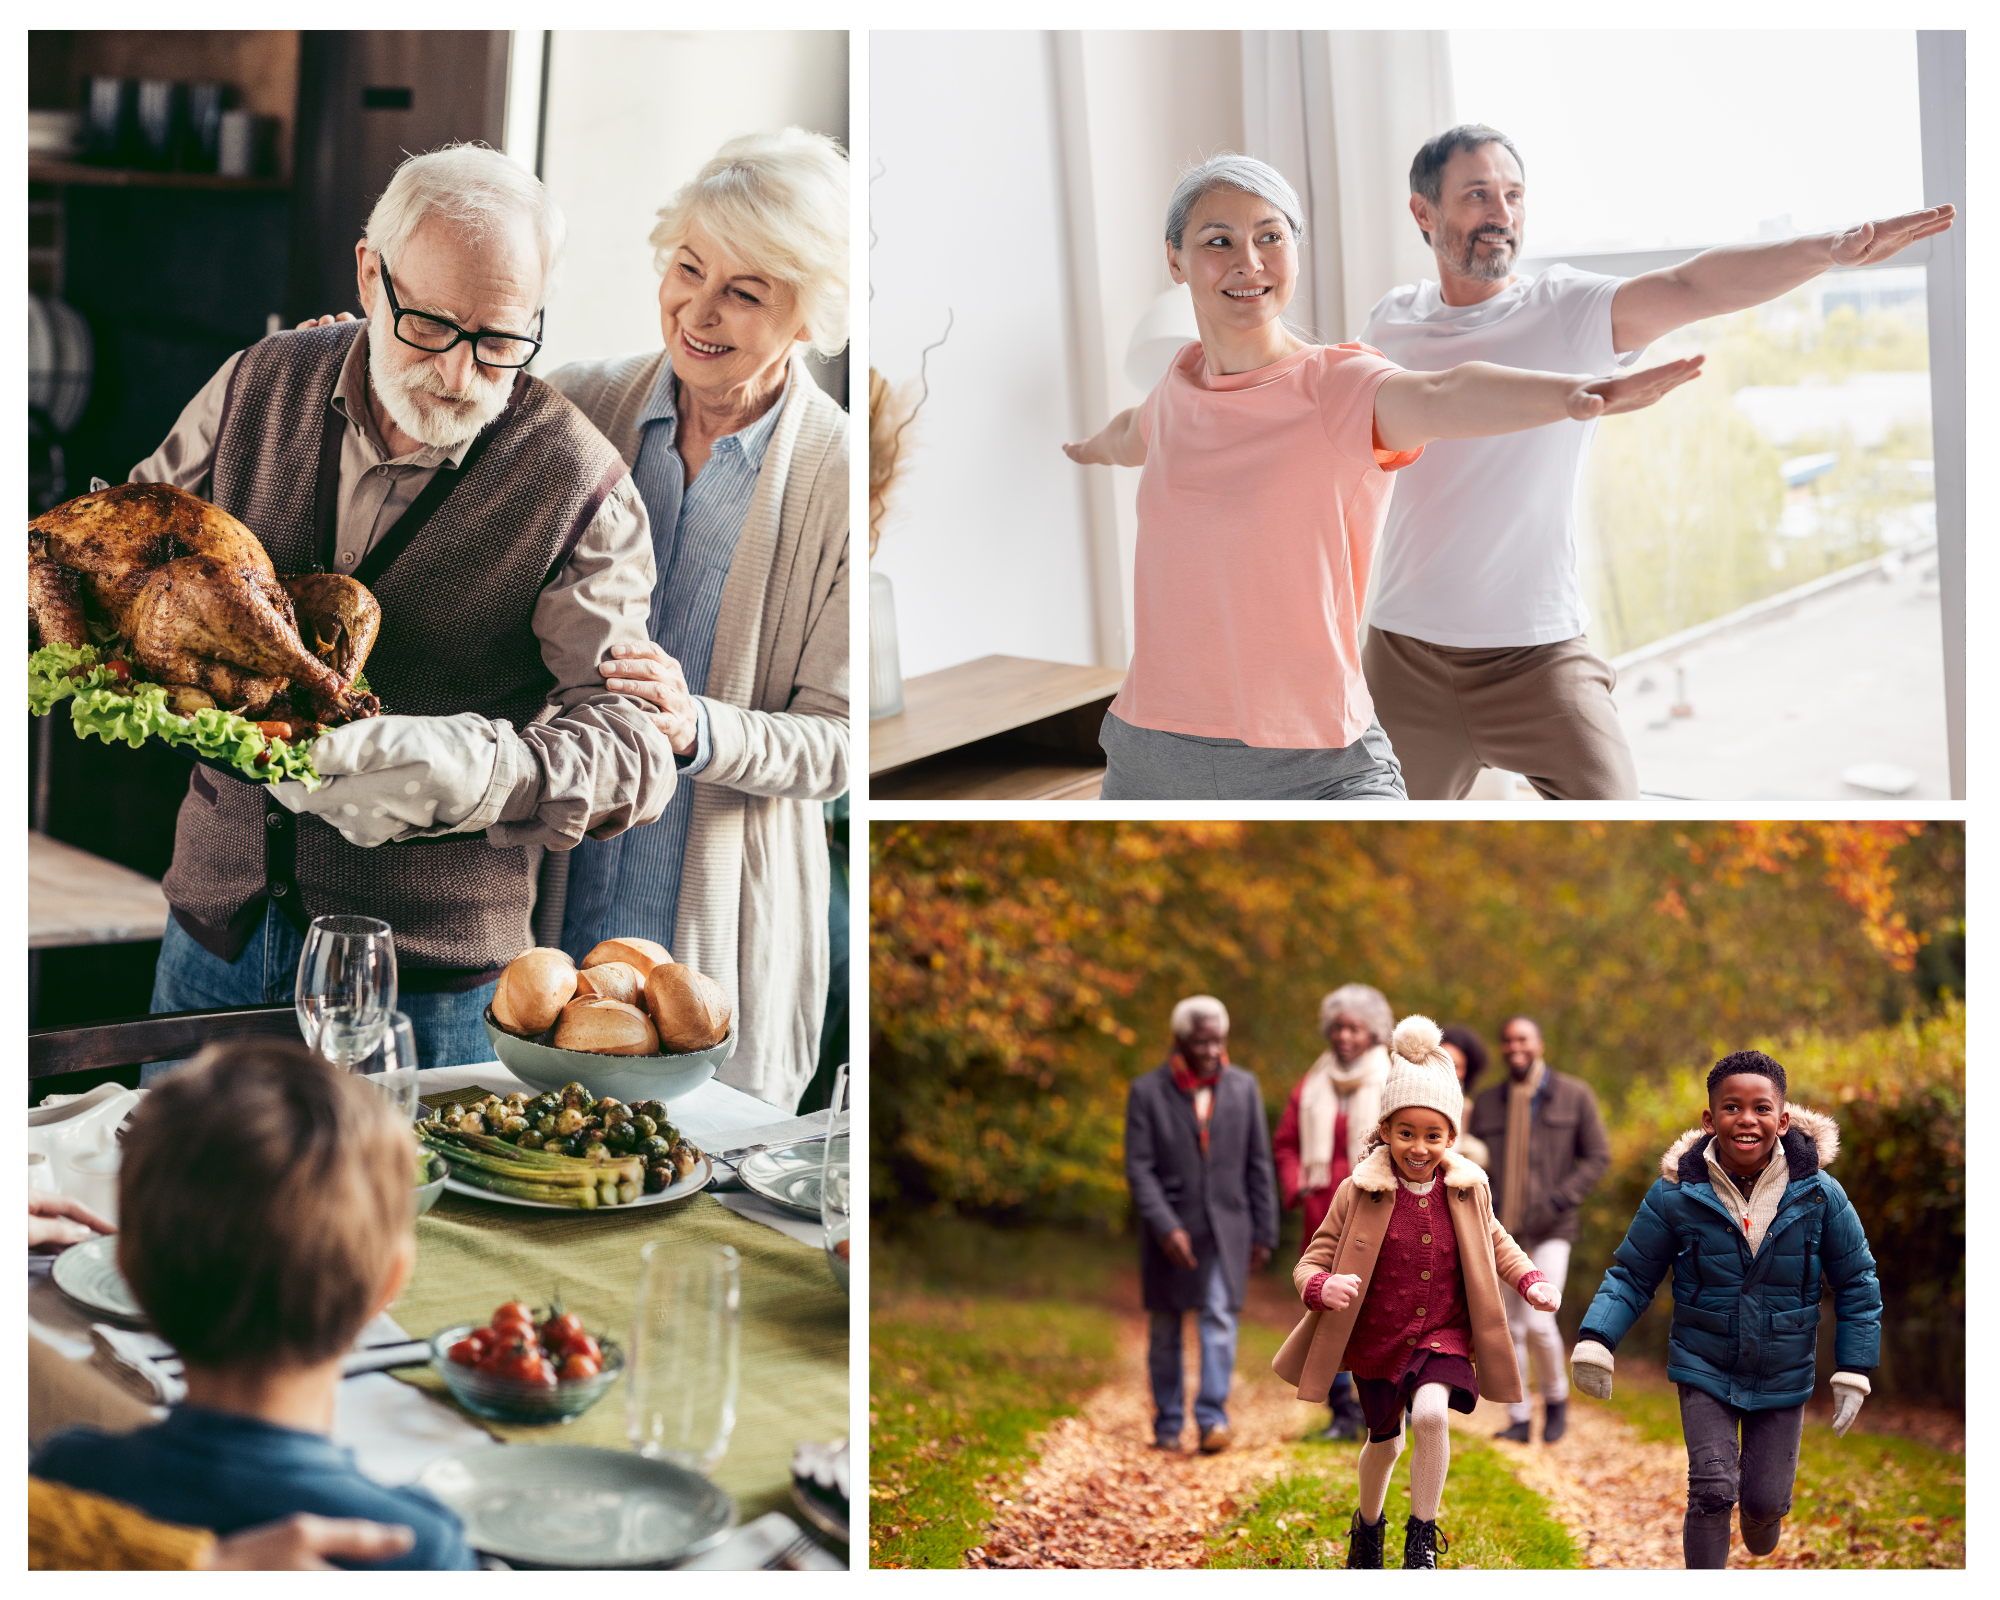 Easy Ways to Get Active After the Big Thanksgiving Meal